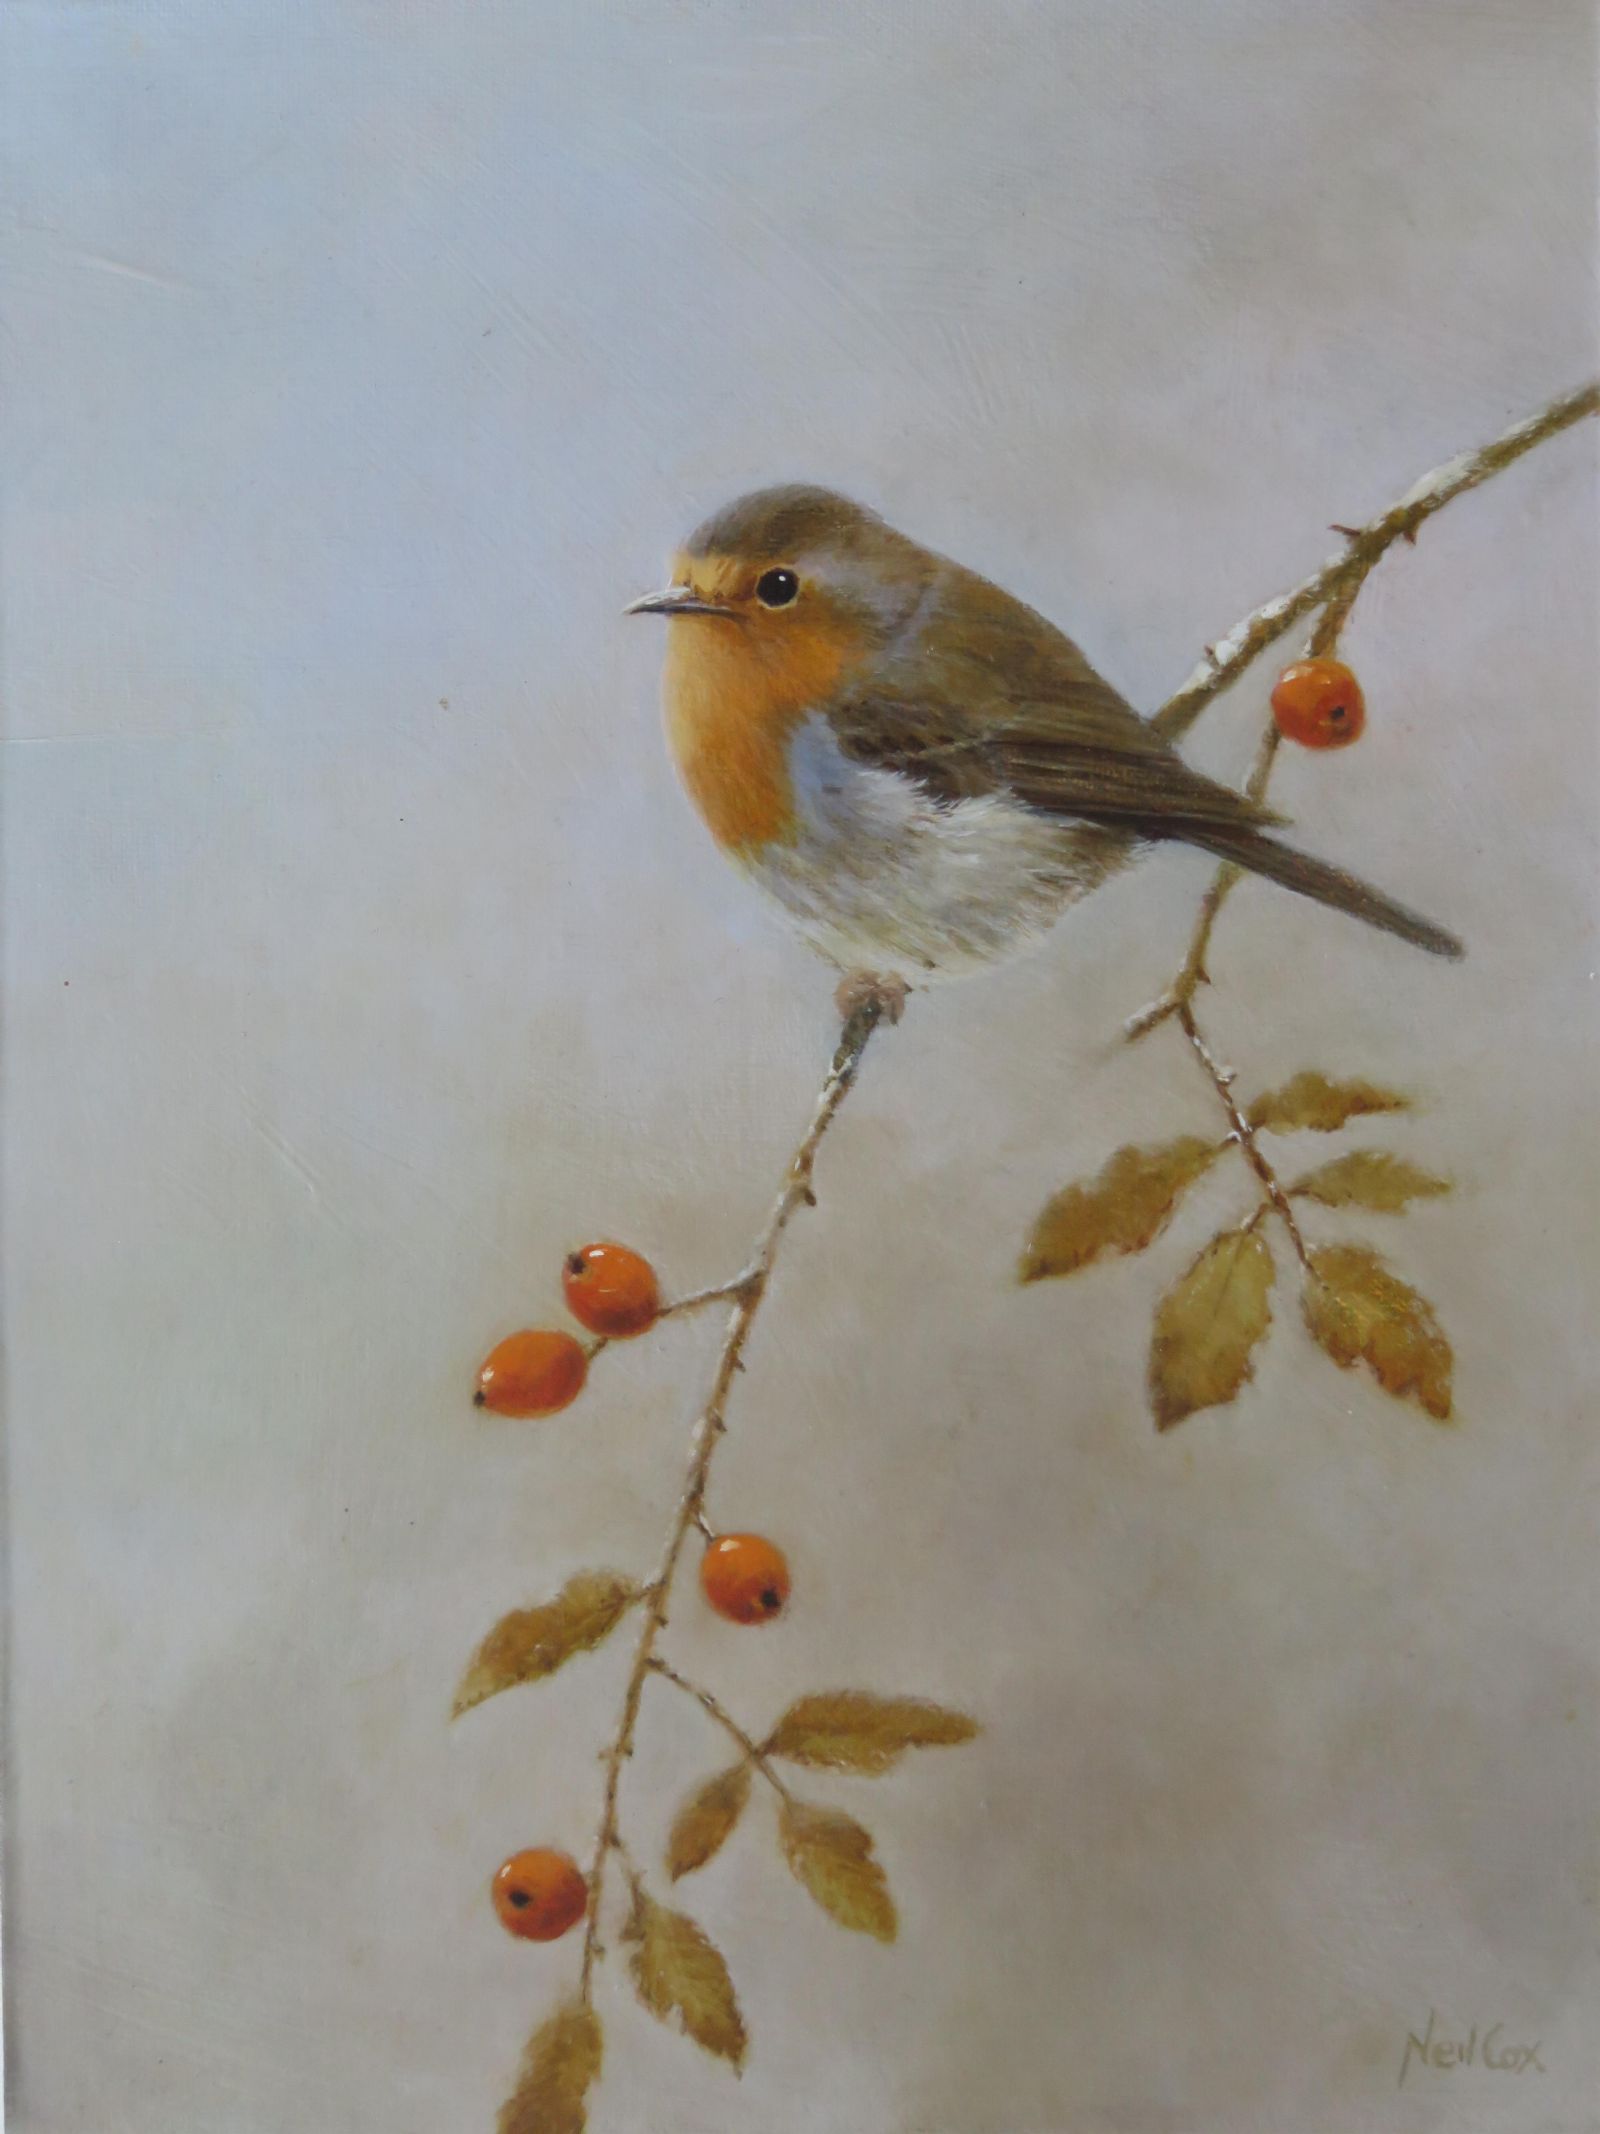 Autumn Robin with Rosehips by Neil Cox